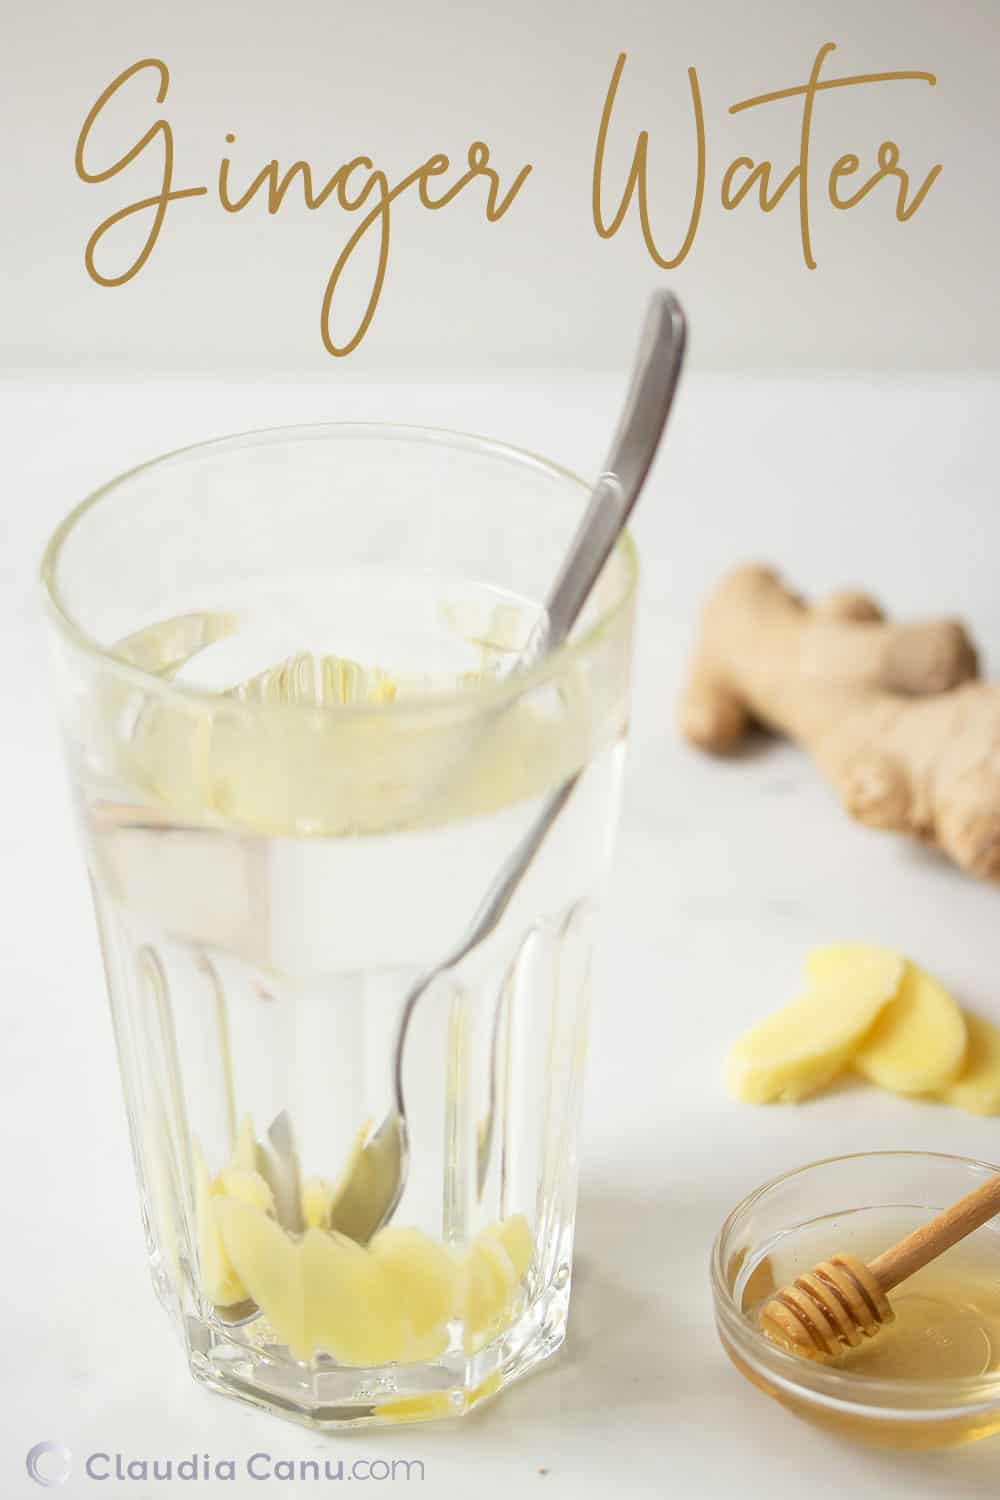 Quick And Easy Ginger Water Recipe ☕ Claudia Canu